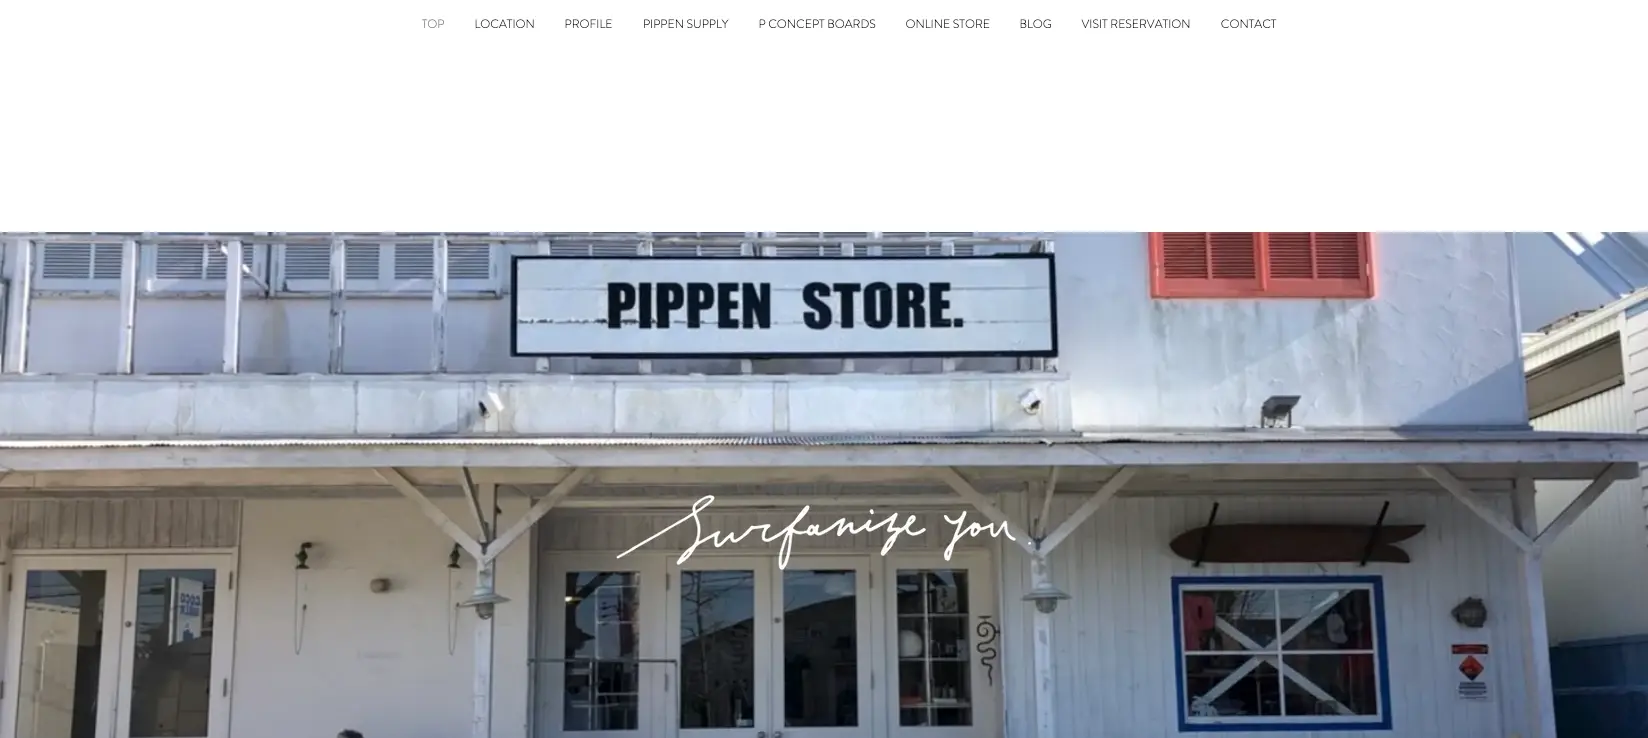 PIPPEN STORE